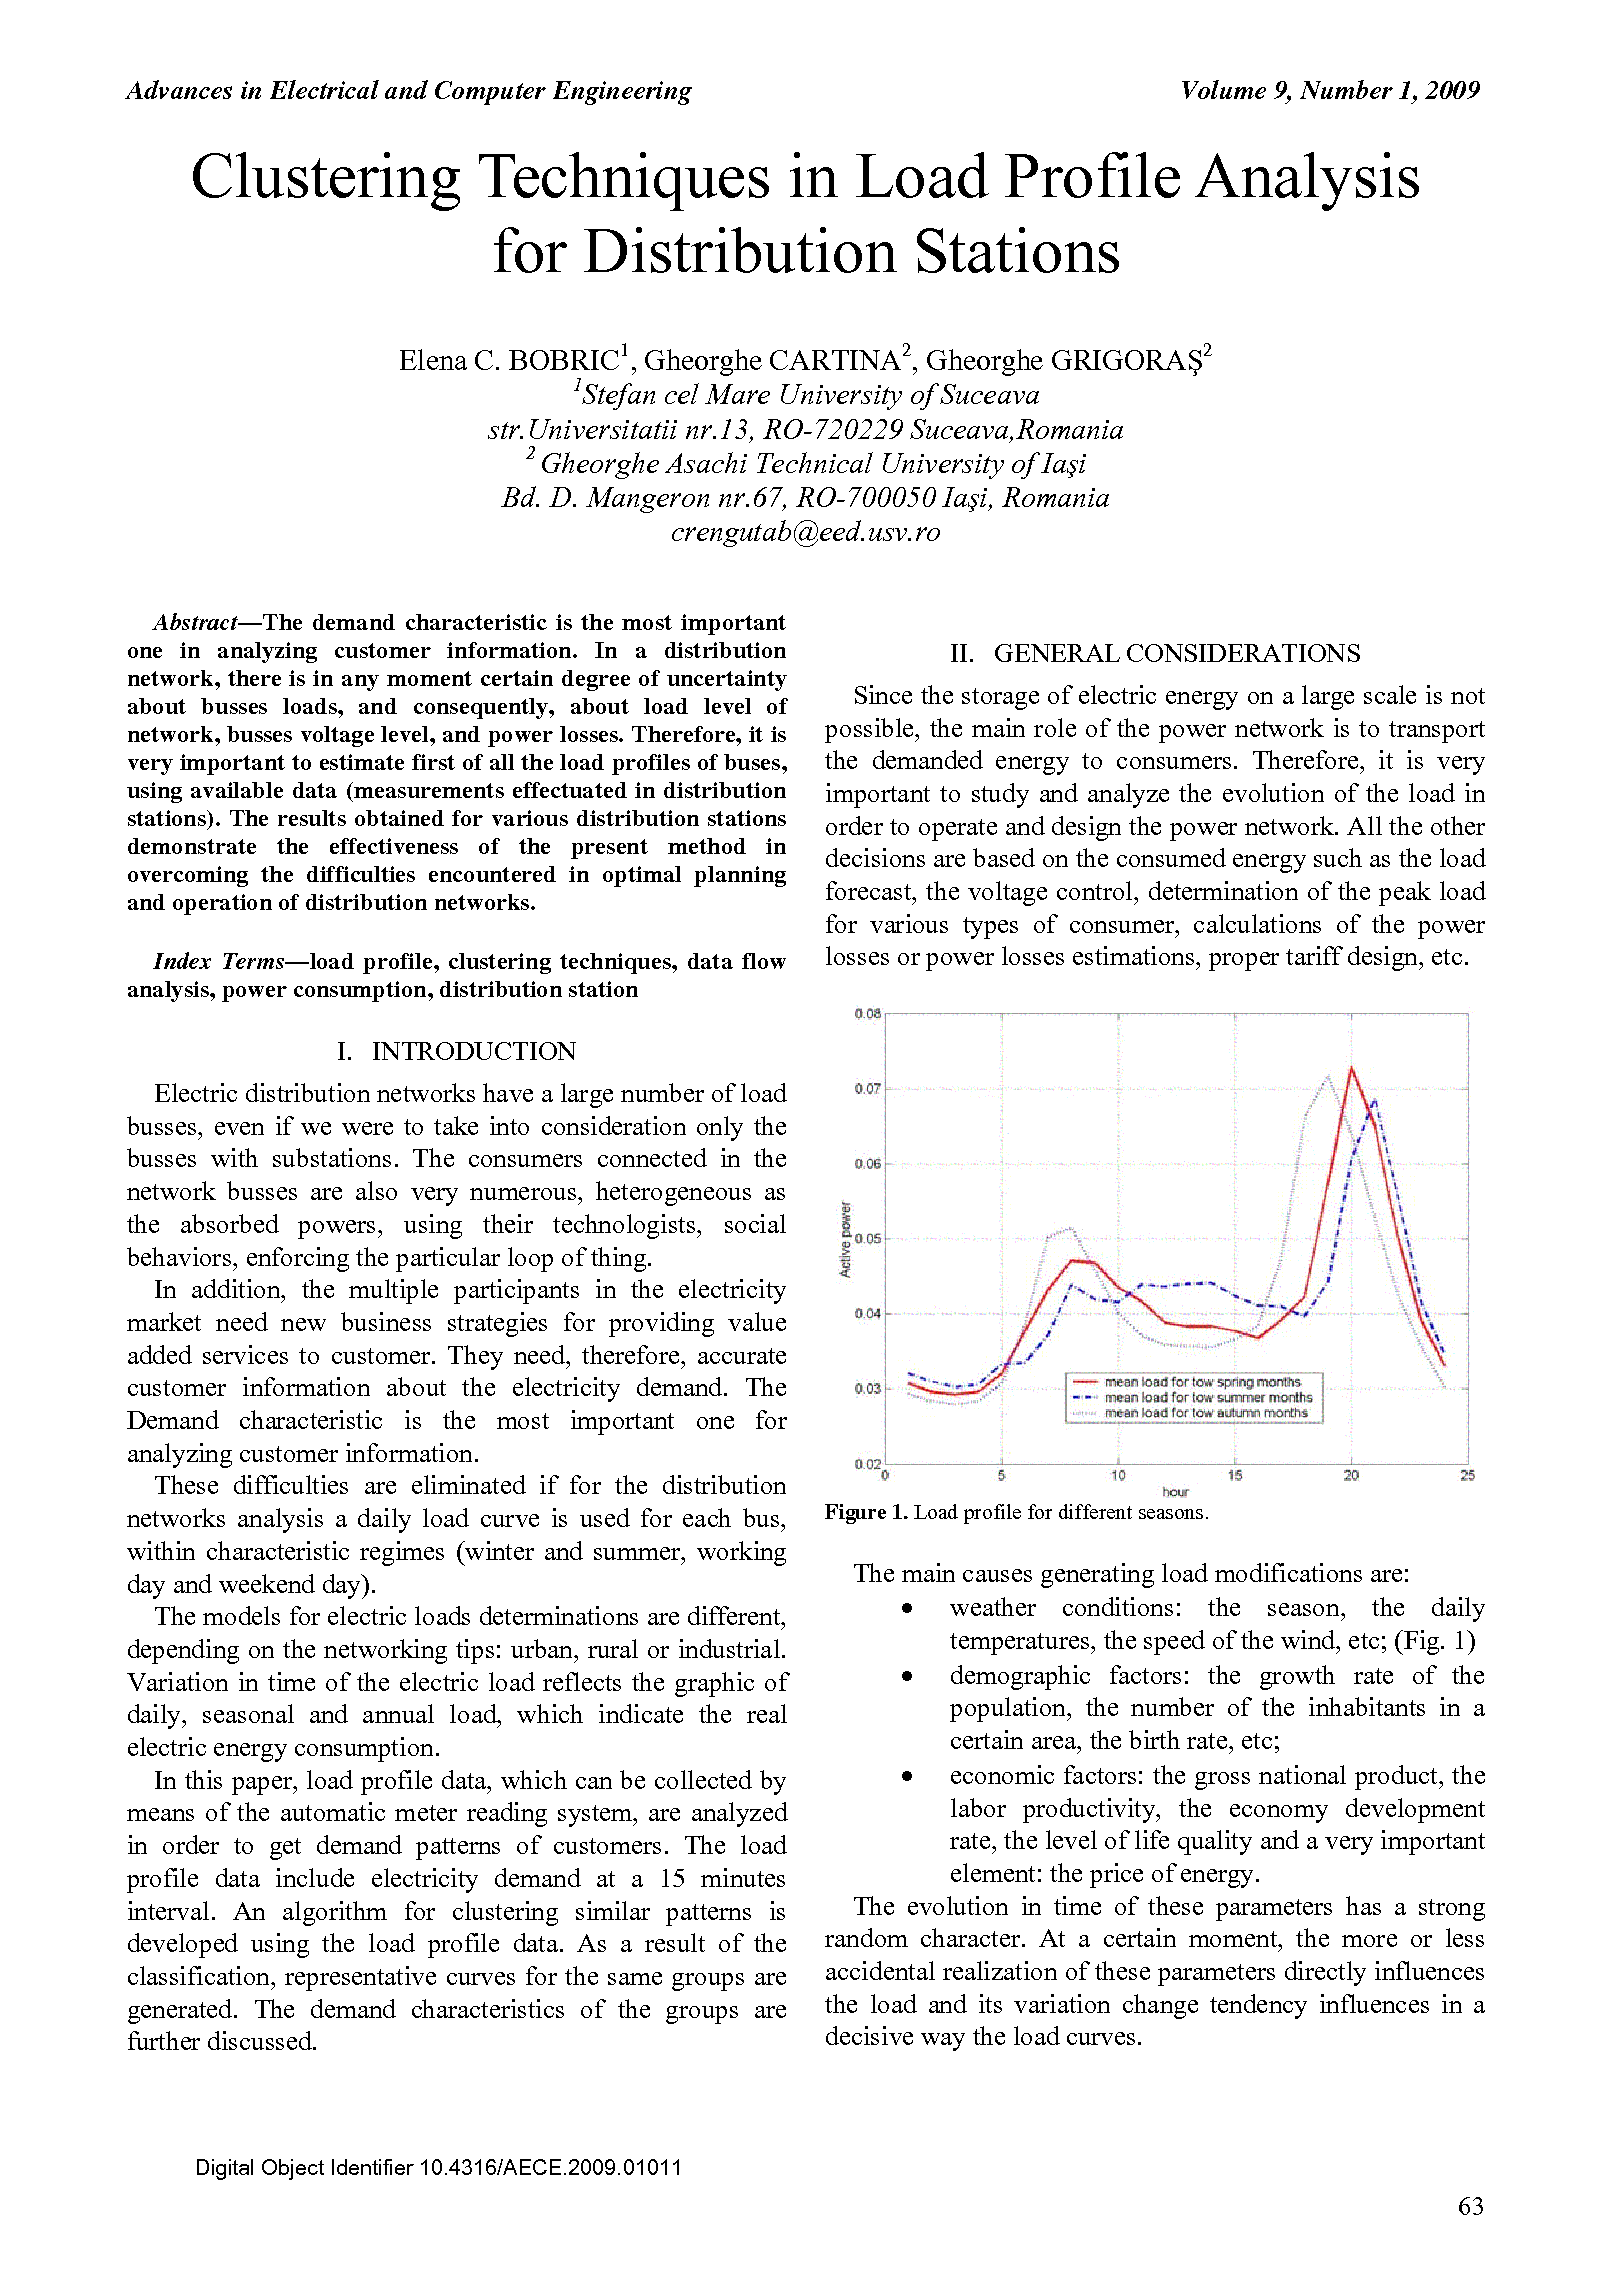 PDF Quickview for paper with DOI:10.4316/AECE.2009.01011